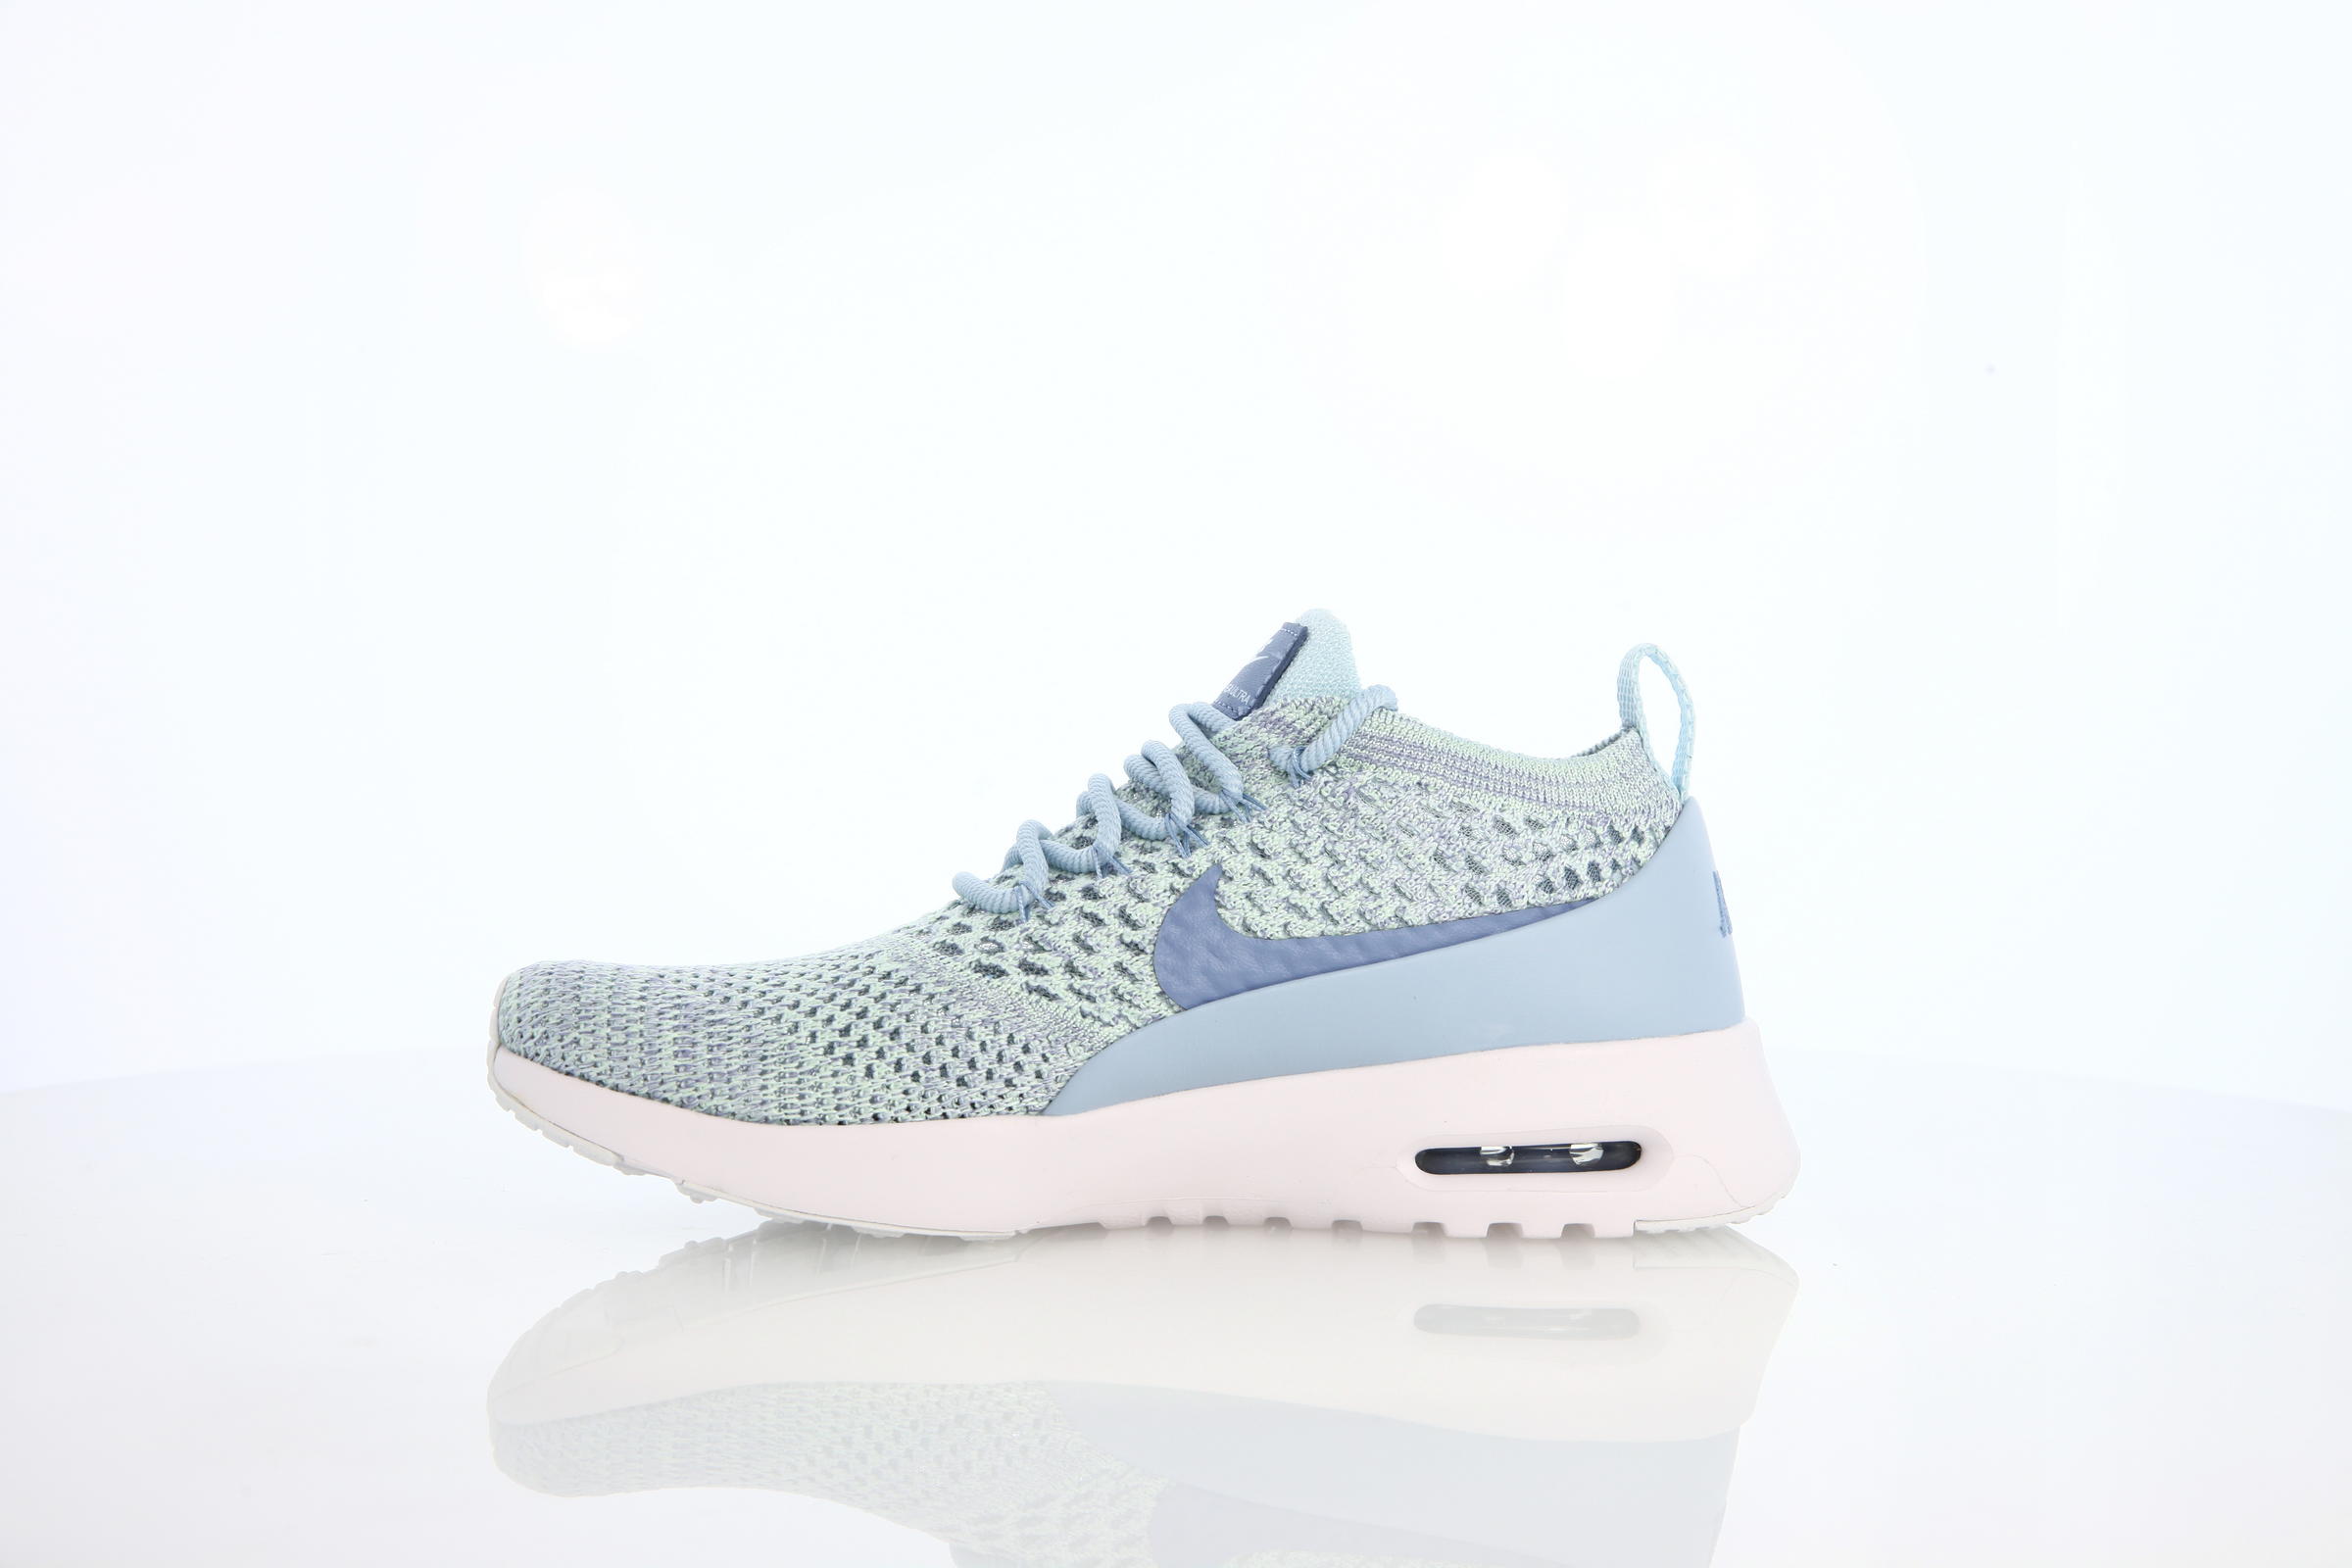 Nike Wmns Air Max Thea Ultra Flyknit "Armory Blue"